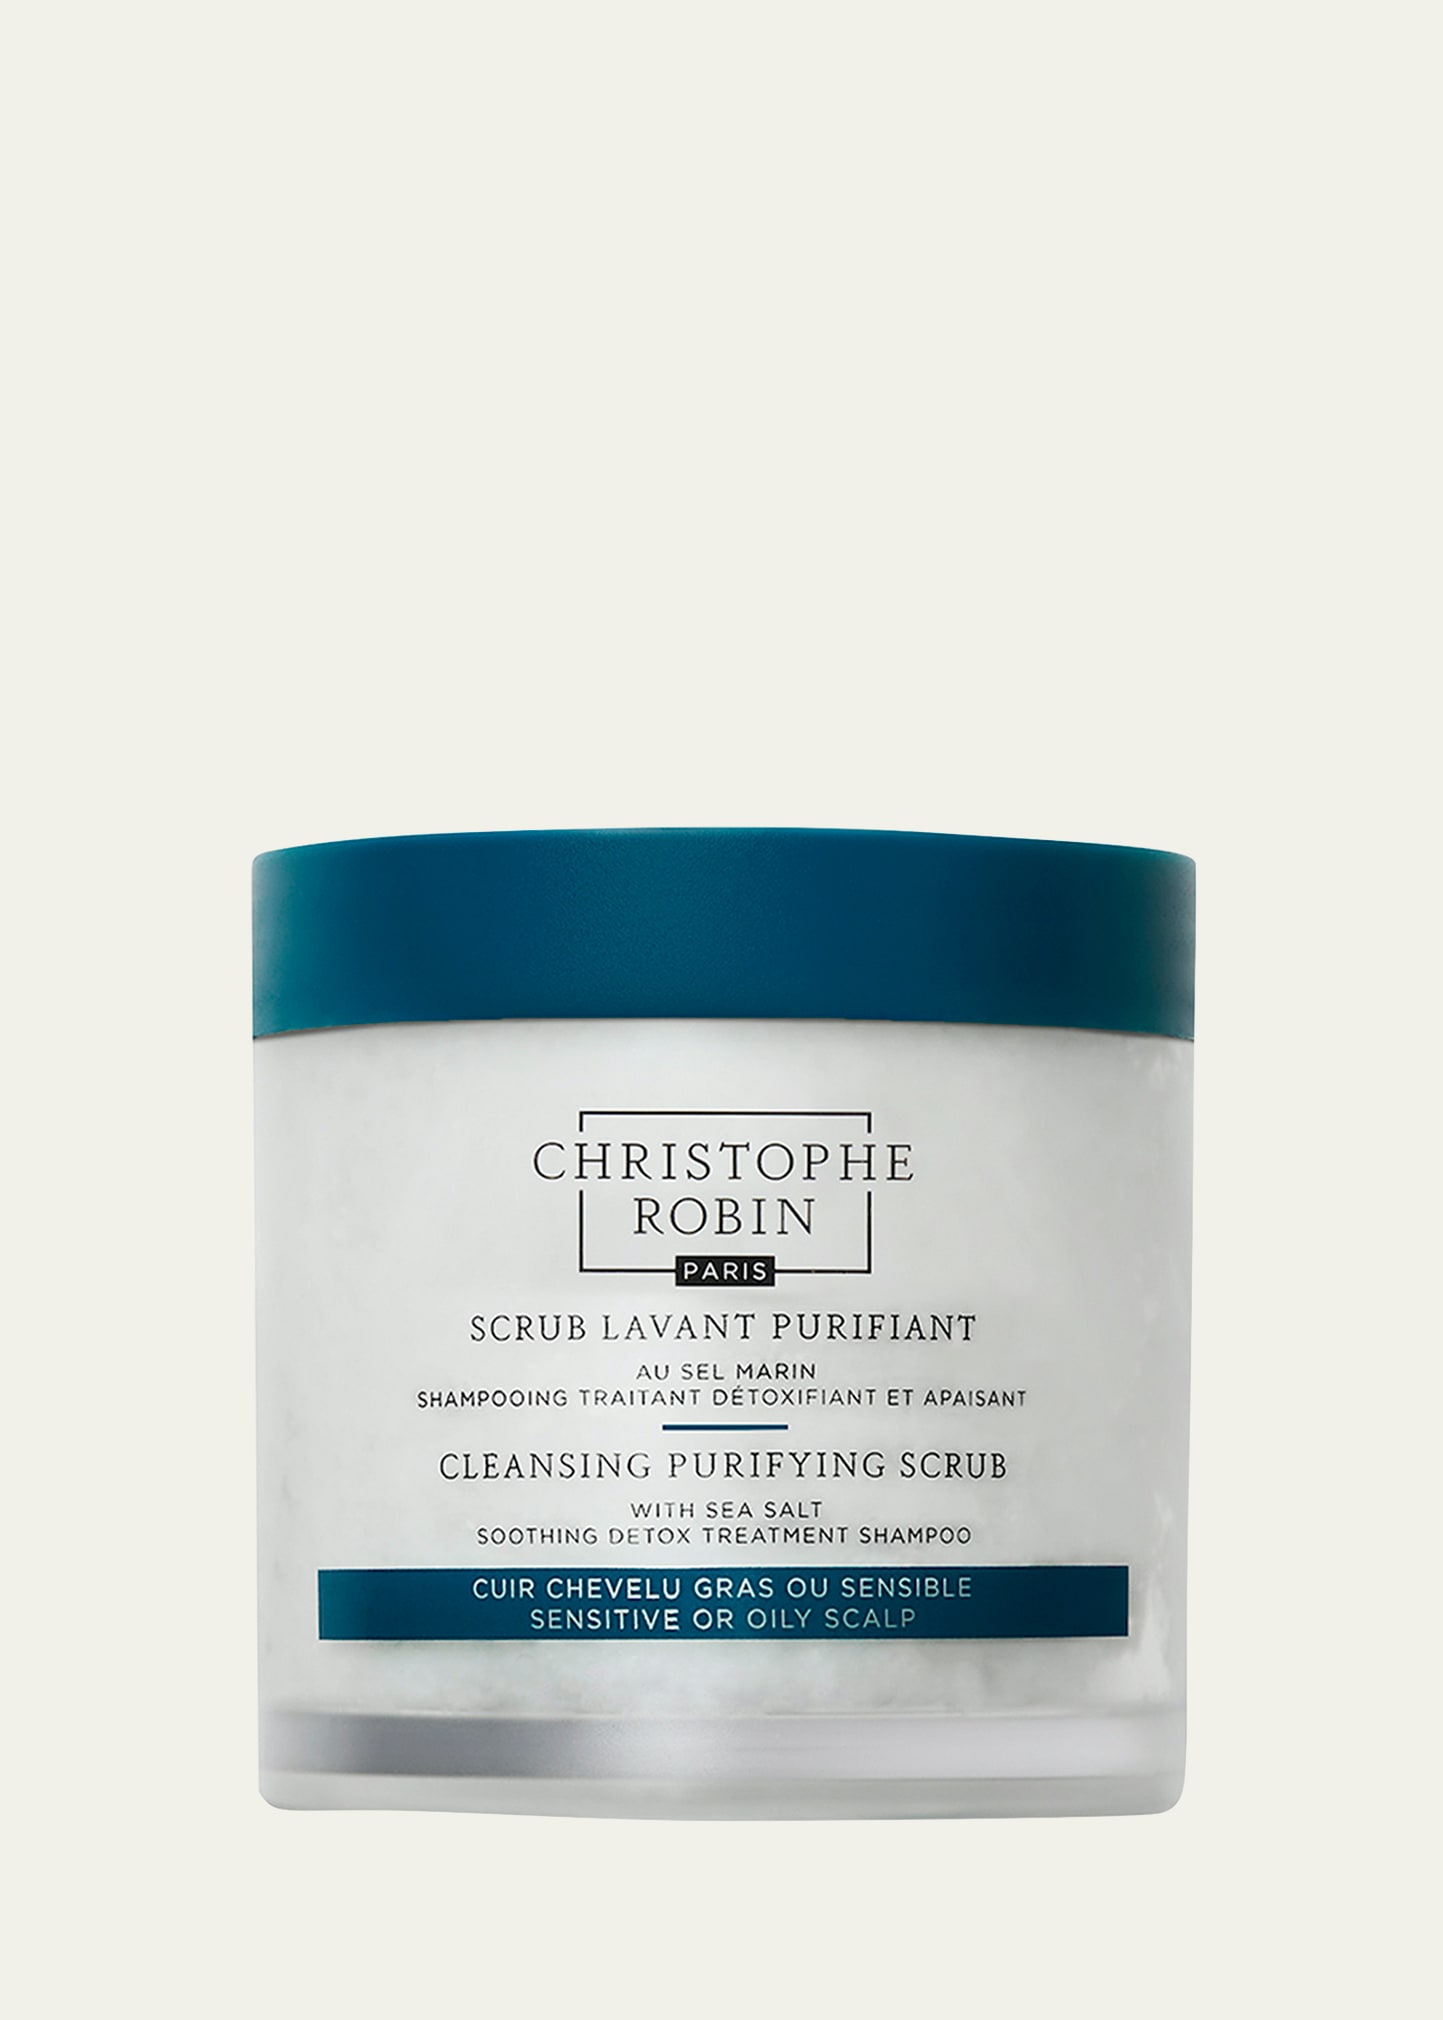 Christophe Robin 8.4 oz. Cleansing Purifying Scrub with Sea Salt